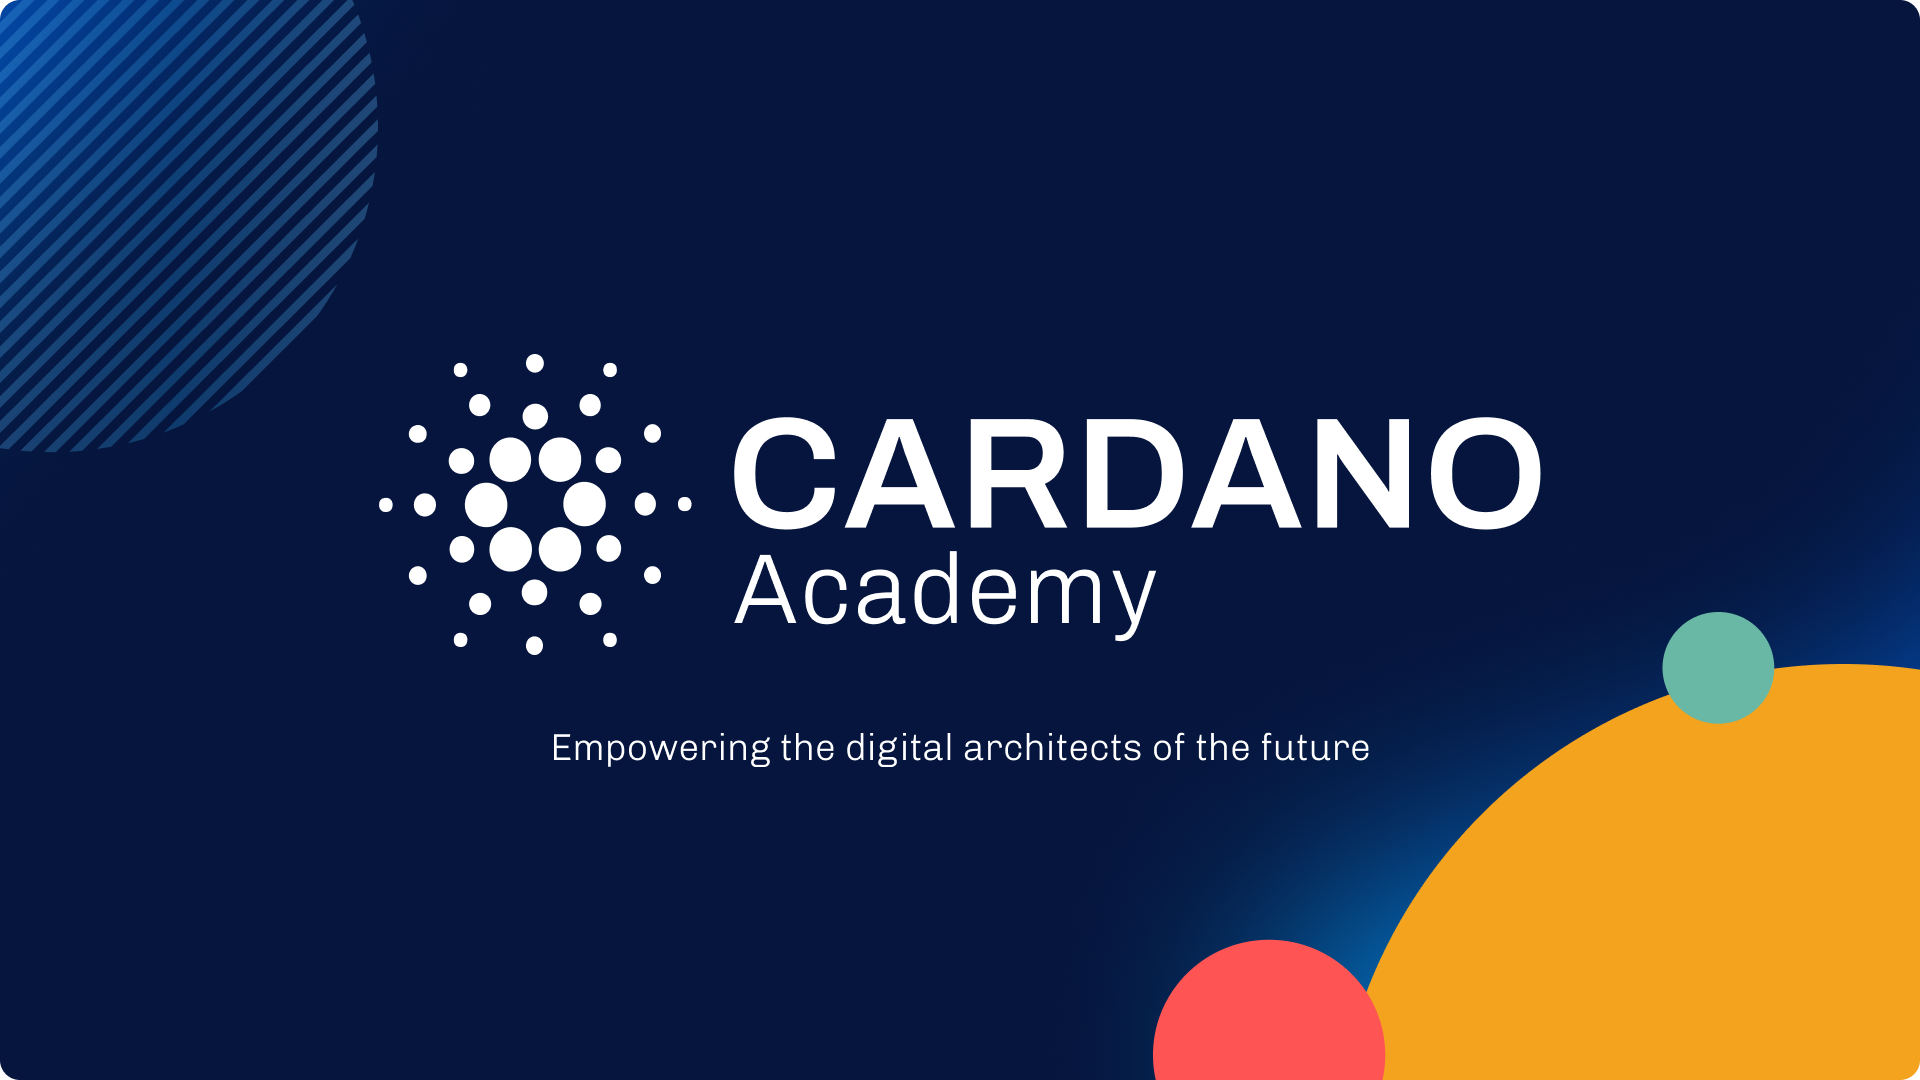 Cardano Academy - Empowering the digital architects of the future